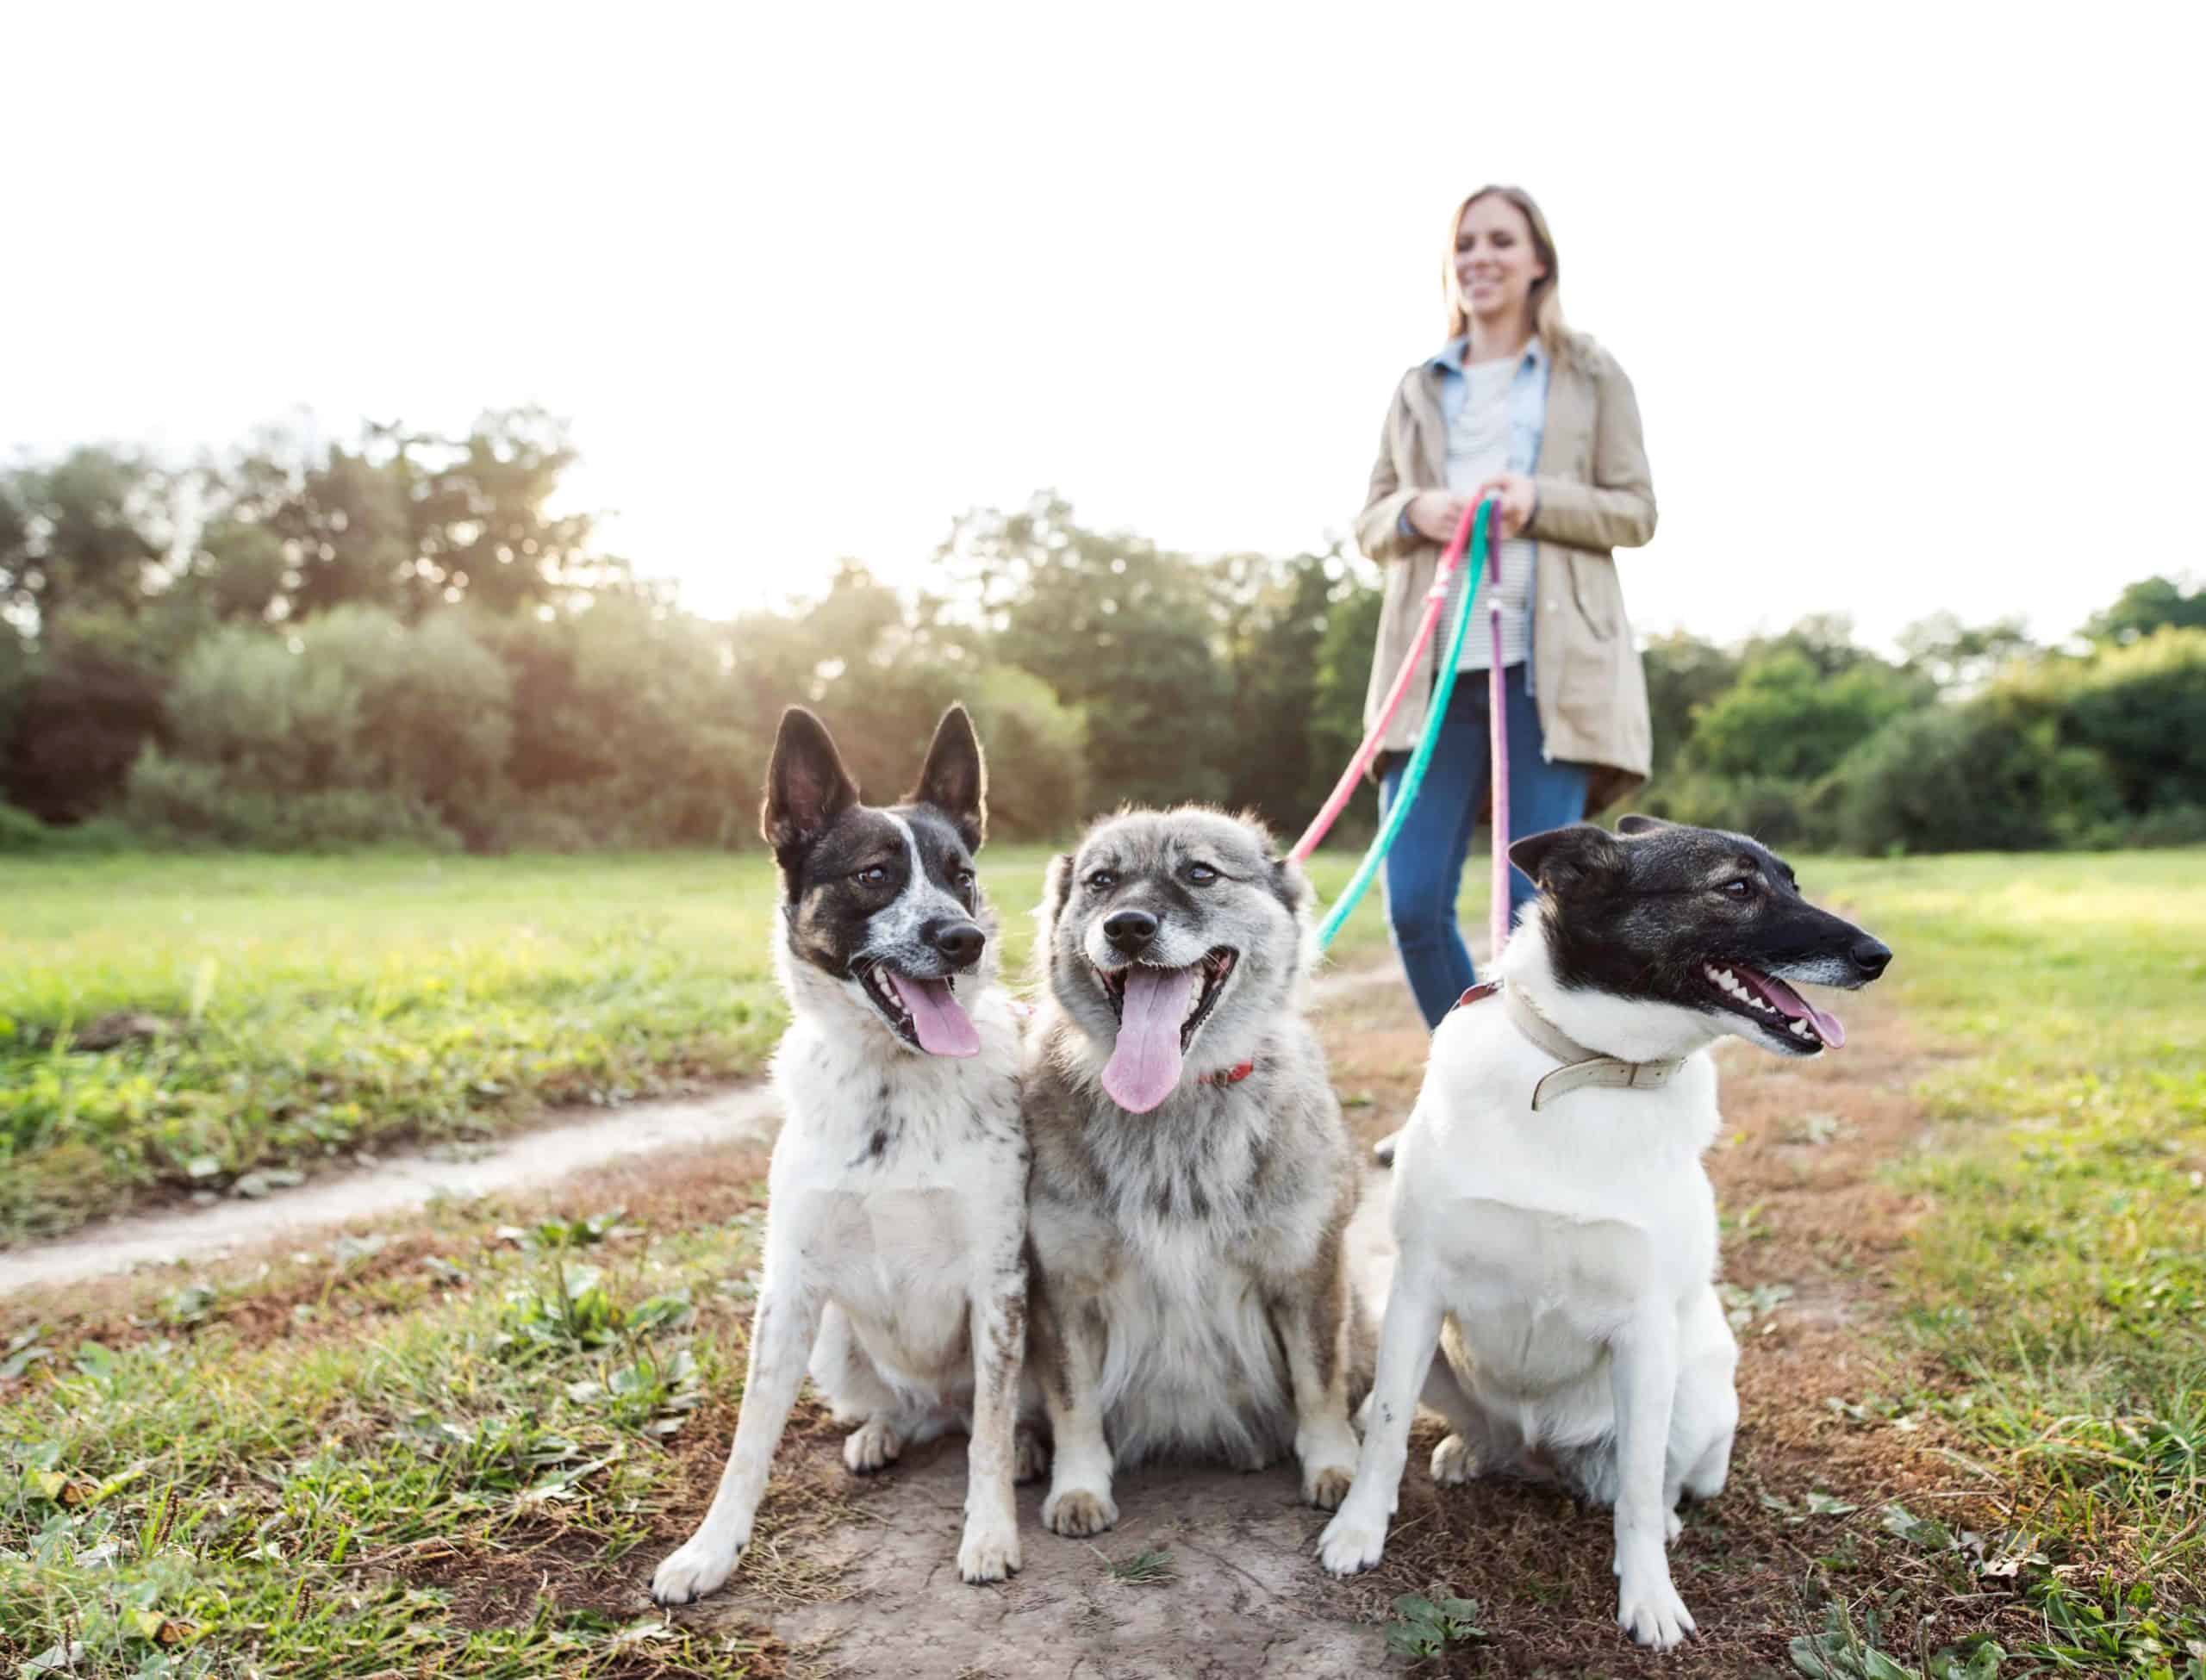 Owner walks three dogs. Having multiple dogs improves your security. You’ll be perfectly safe with a team of bodyguards. No one wants to break into a house with three dogs.